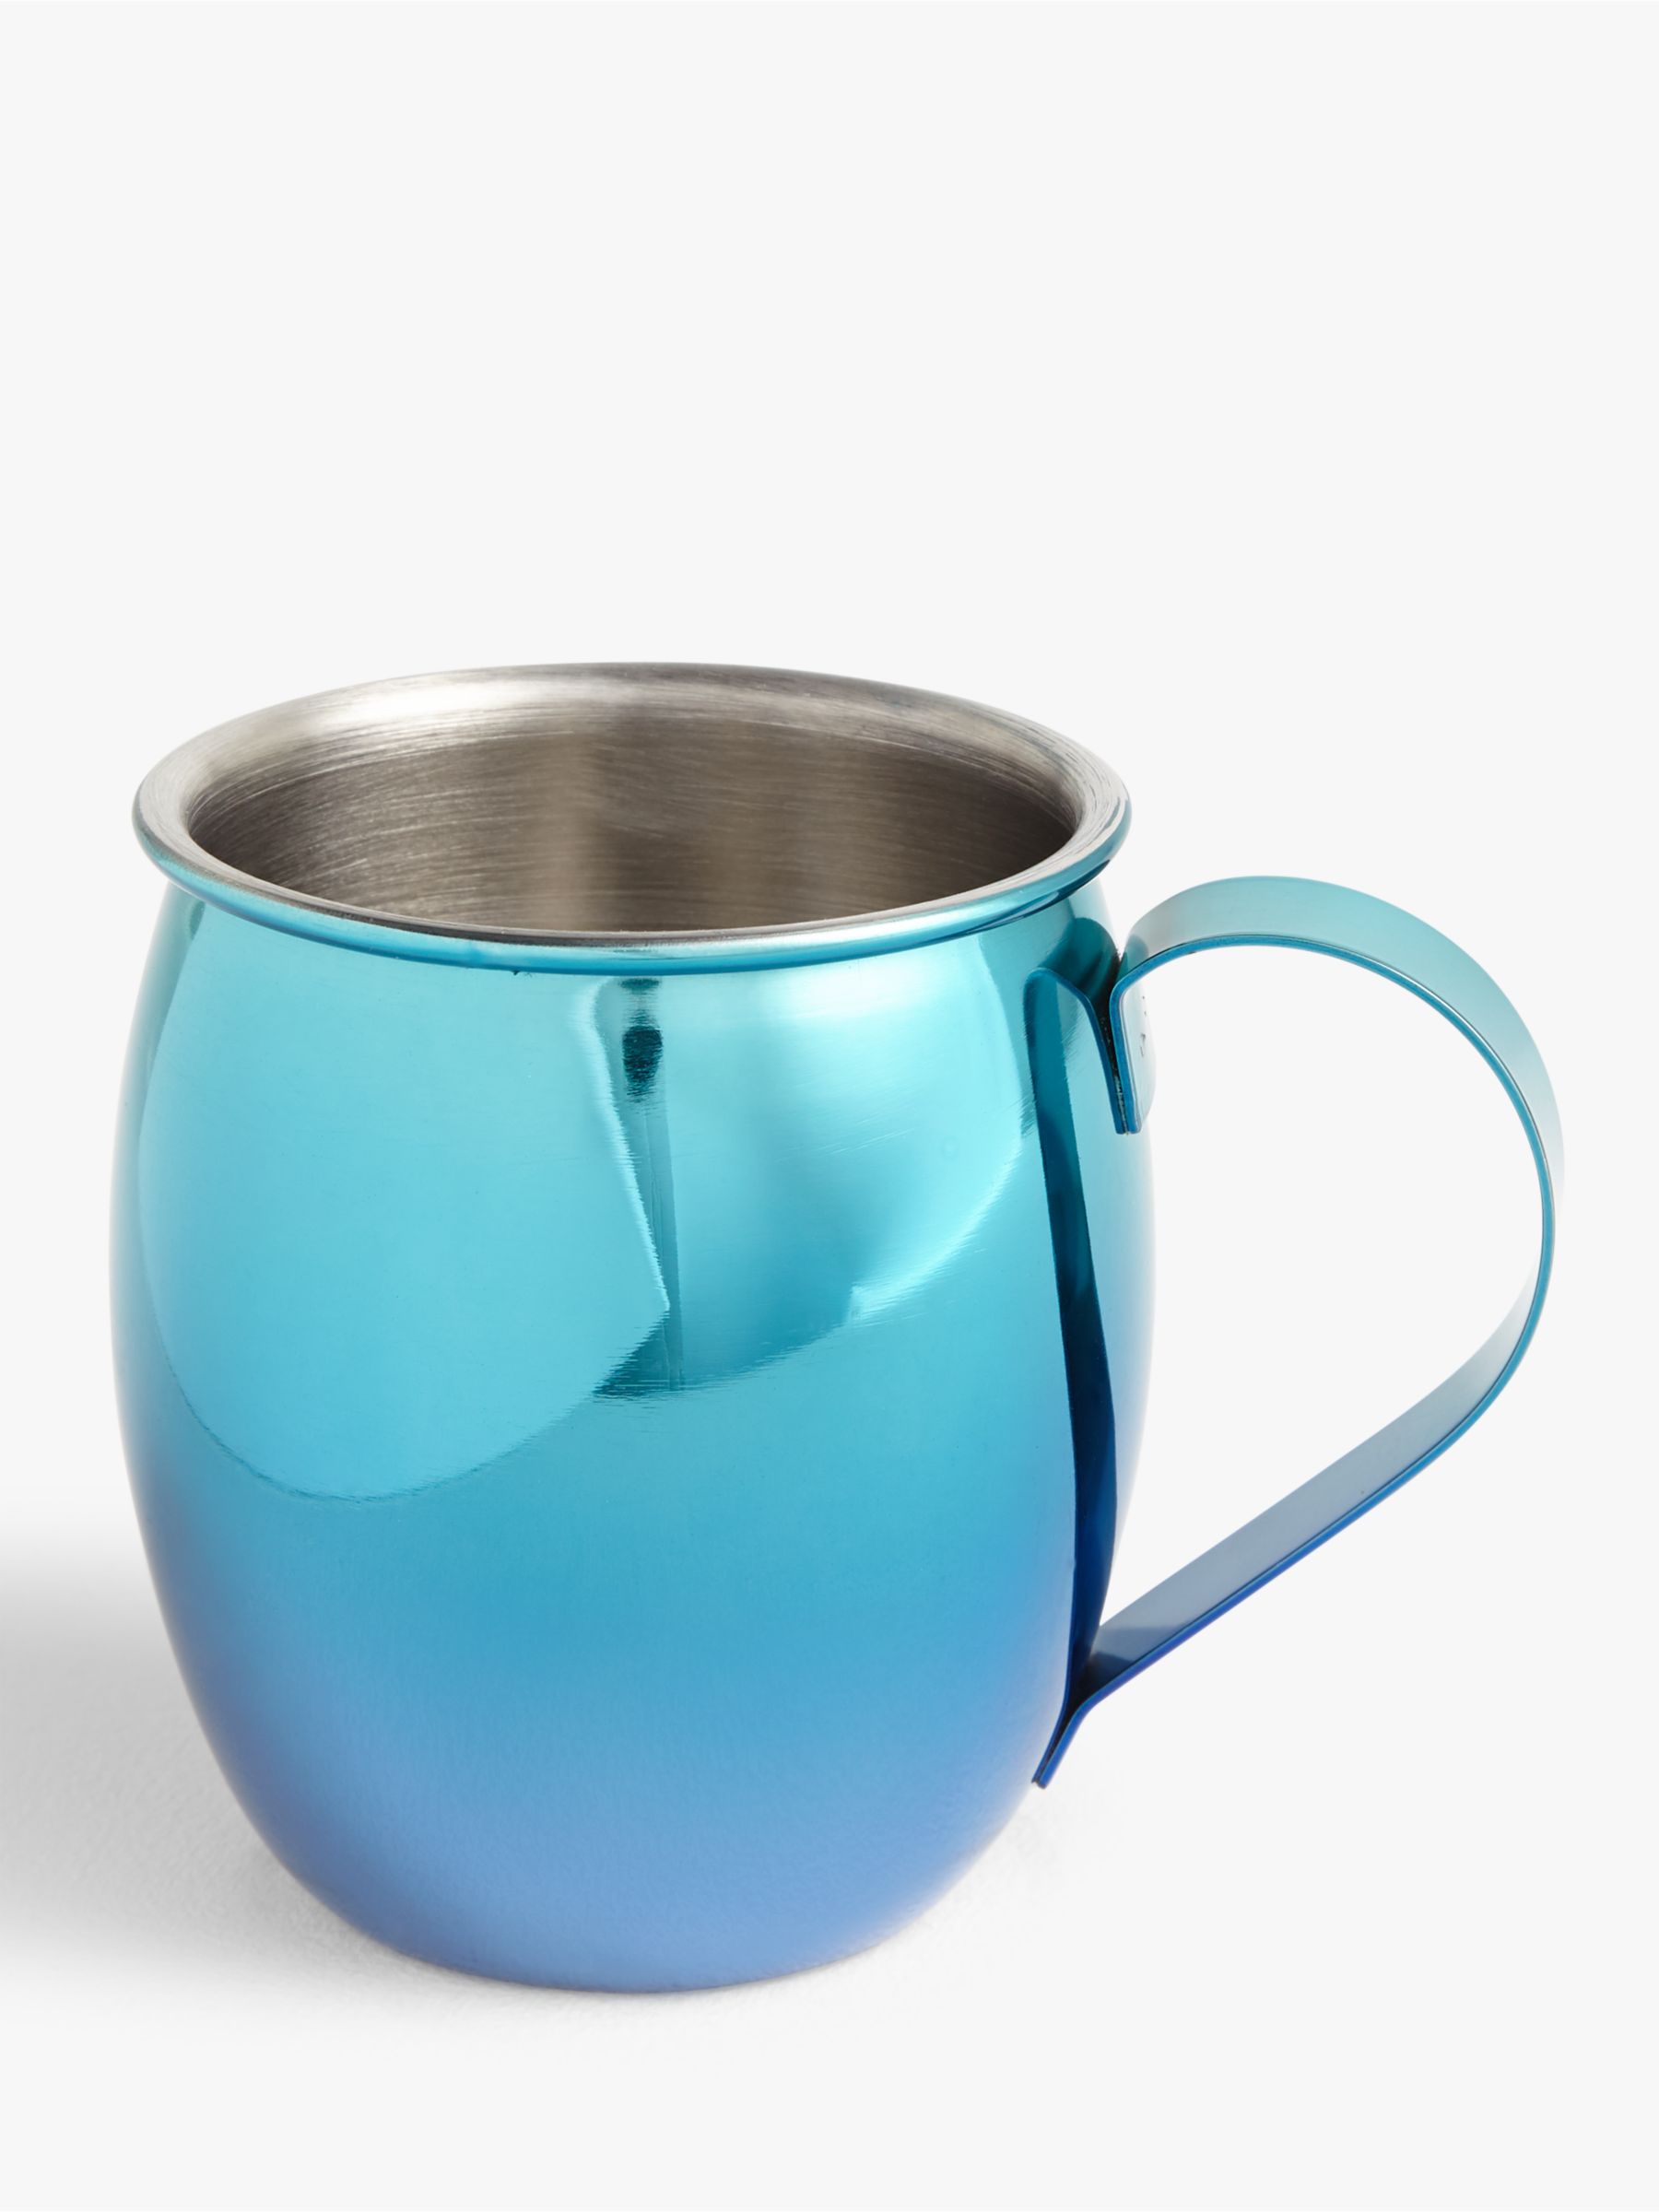 John Lewis & Partners Party Stainless Steel Moscow Mule Cocktail Mug, 560ml